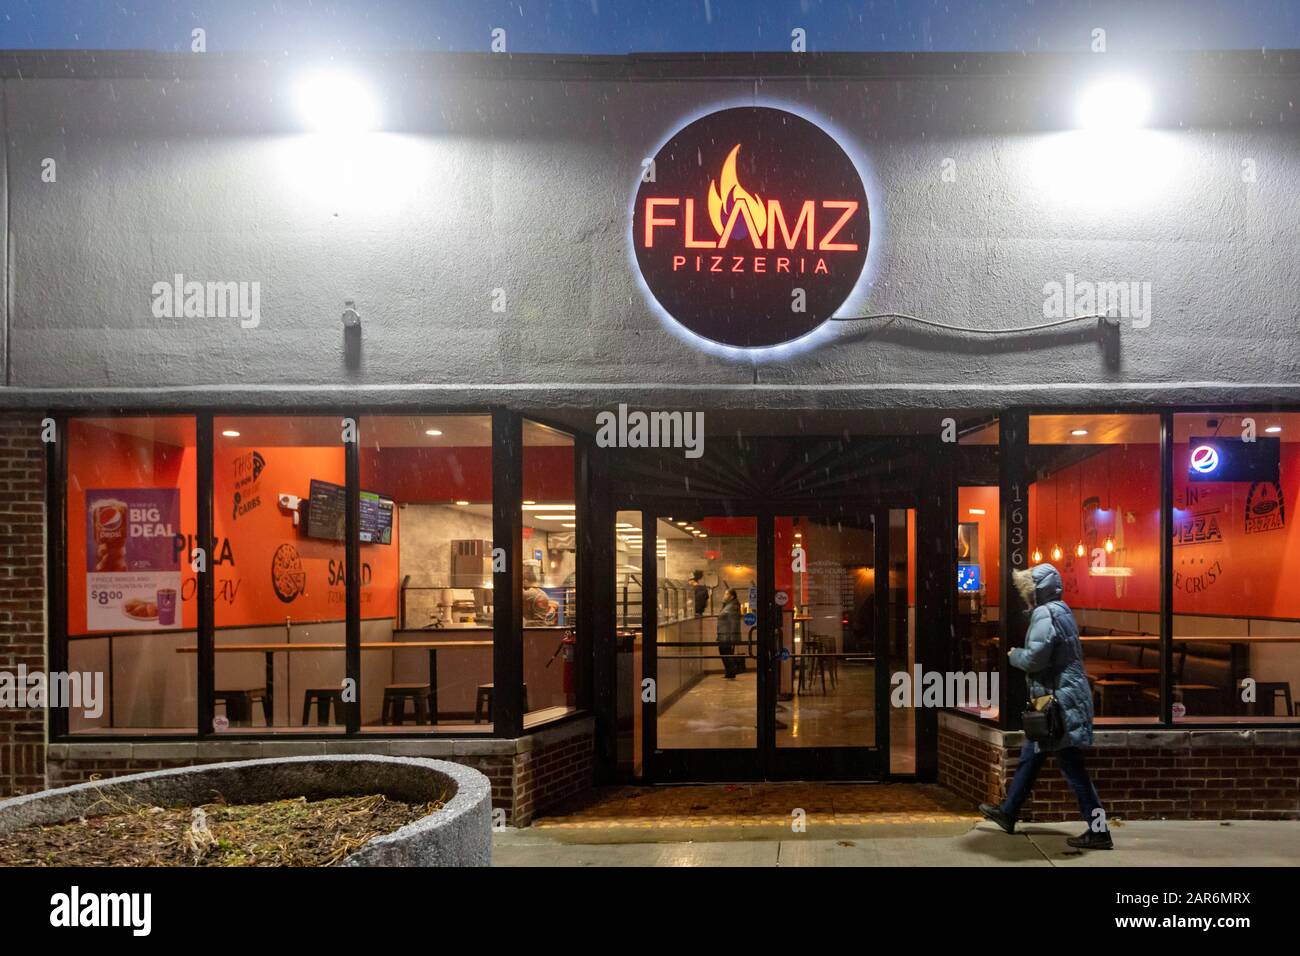 Detroit, Michigan - The Flamz Pizzeria in the city's Morningside neighborhood. The restaurant offers made to order pizzas with unlimited toppings, bak Stock Photo